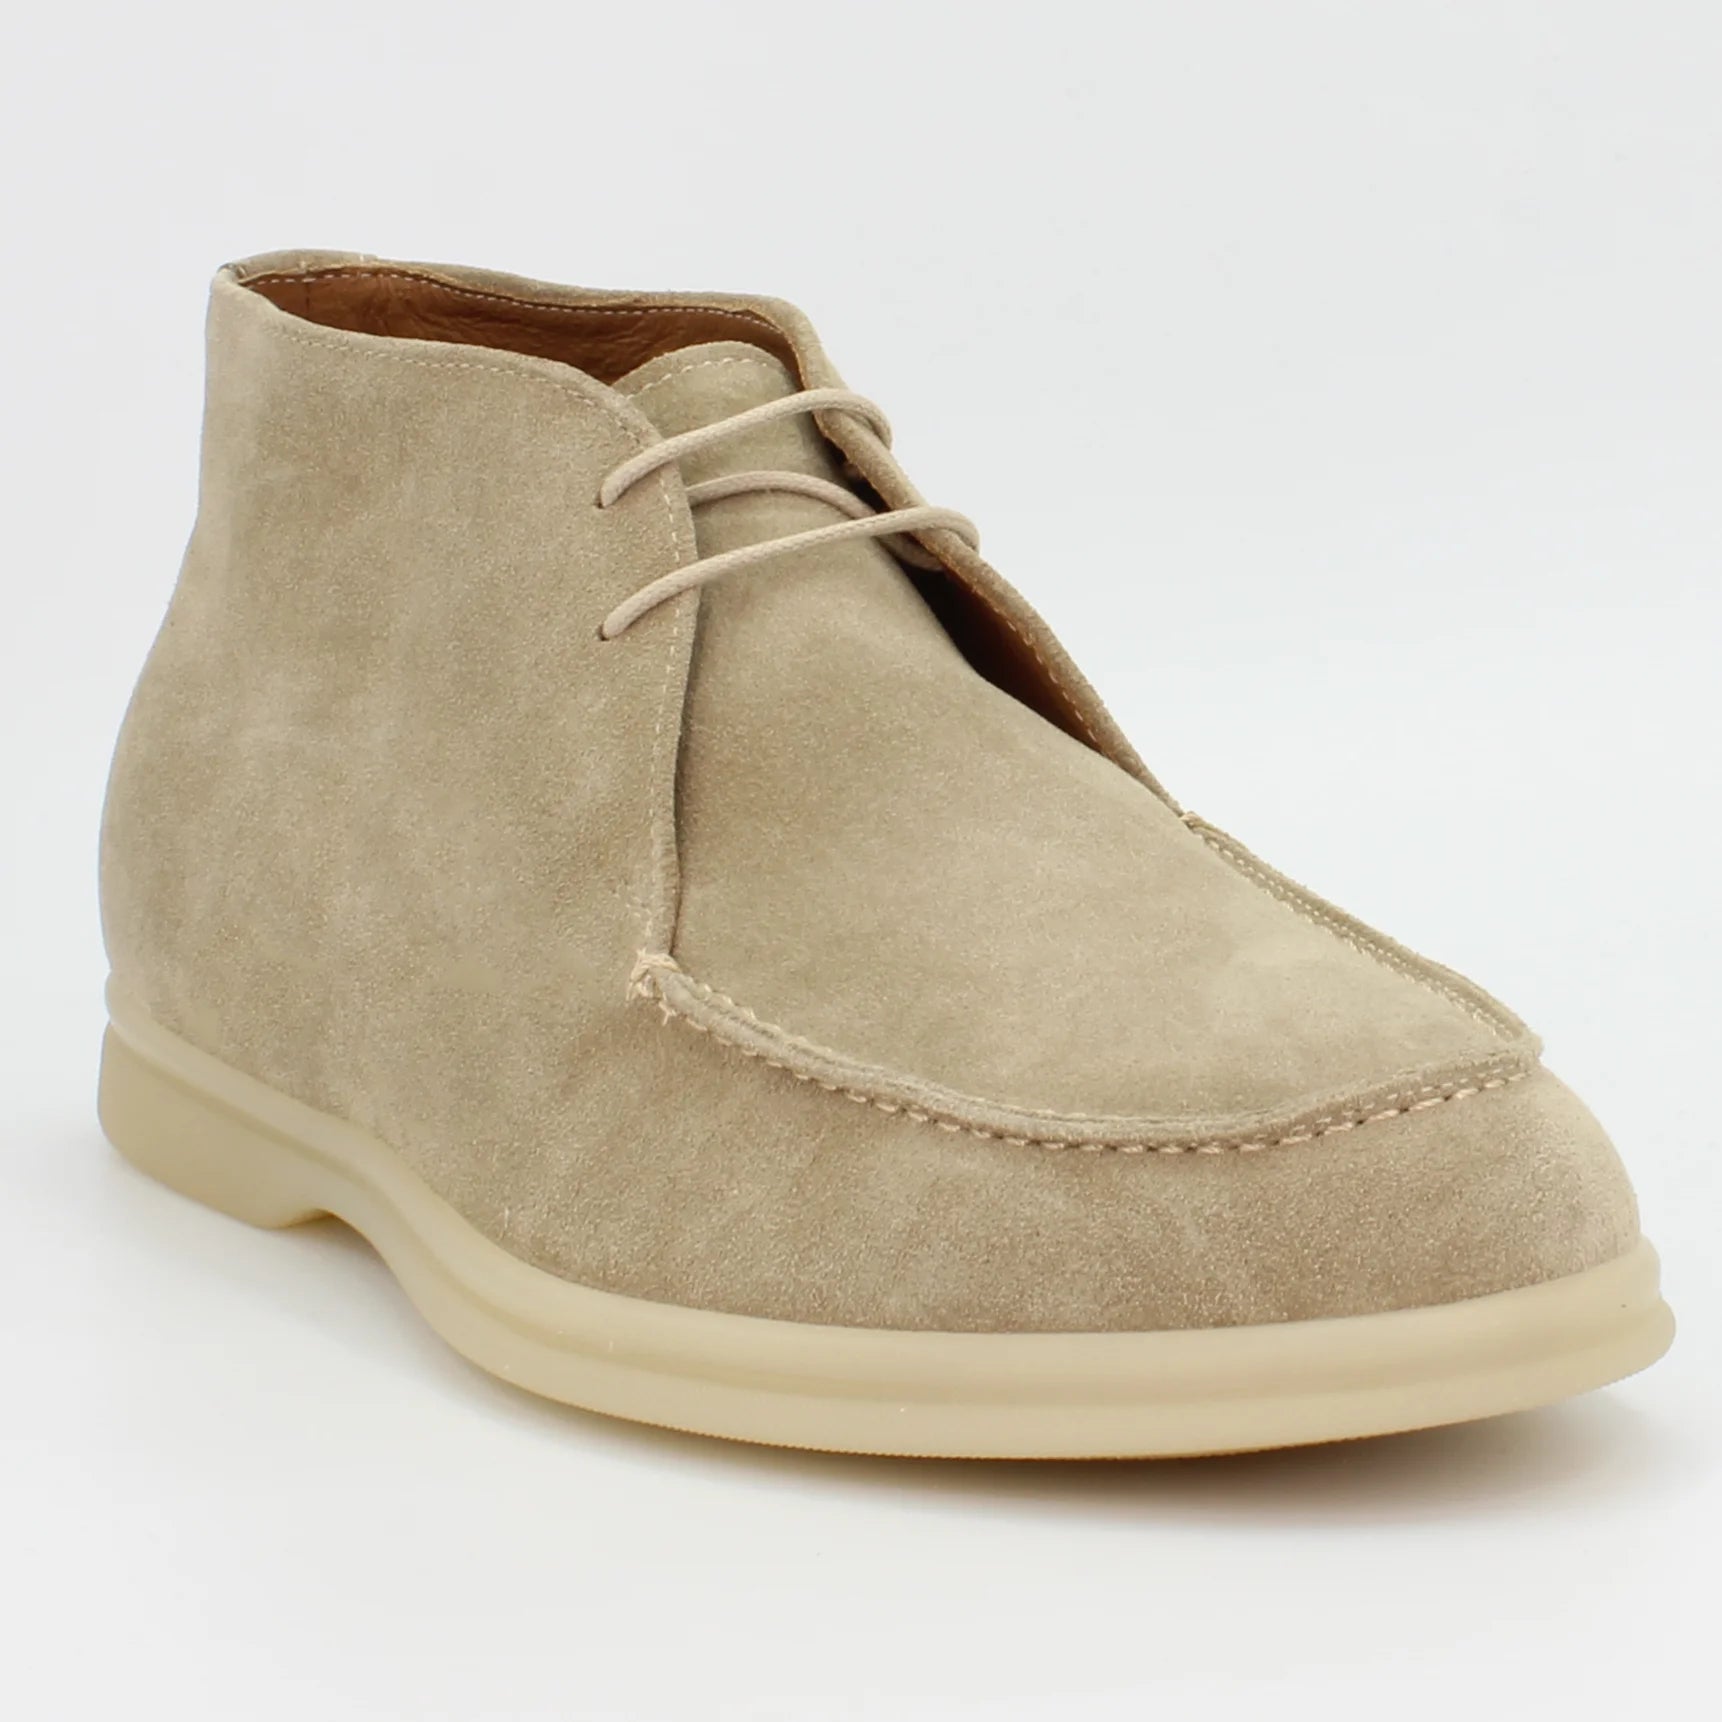 Shop Handmade Italian Leather suede chukka boot in topo (BEED05) or browse our range of hand-made Italian shoes for men in leather or suede in-store at Aliverti Cape Town, or shop online. We deliver in South Africa & offer multiple payment plans as well as accept multiple safe & secure payment methods.